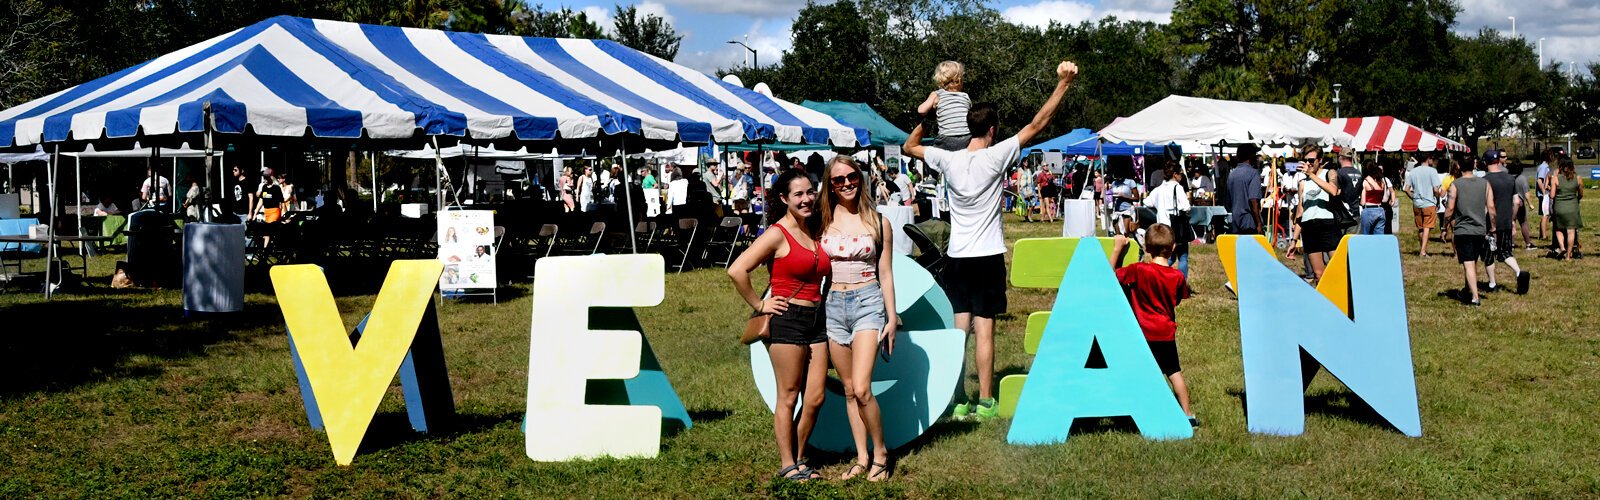 Happy and proud to be vegan, people pose on both sides of the "VEGAN" letters of the 11th Annual Tampa Bay VegFest at Perry Harvey Sr. Park in Tampa, Saturday, November 5th.